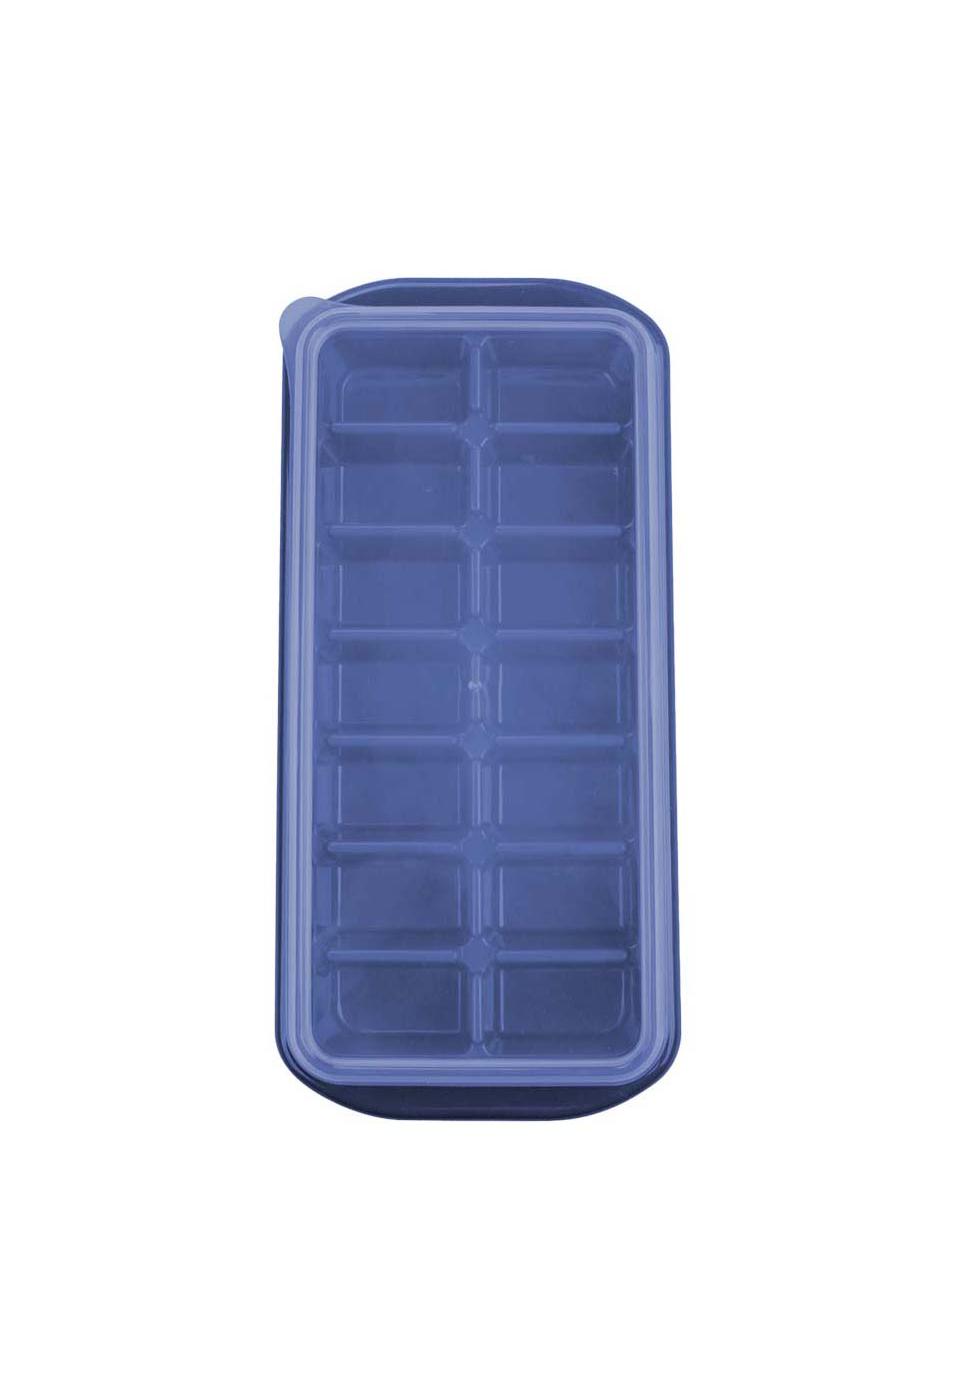 Destination Holiday Covered Ice Cube Tray - Navy; image 2 of 2